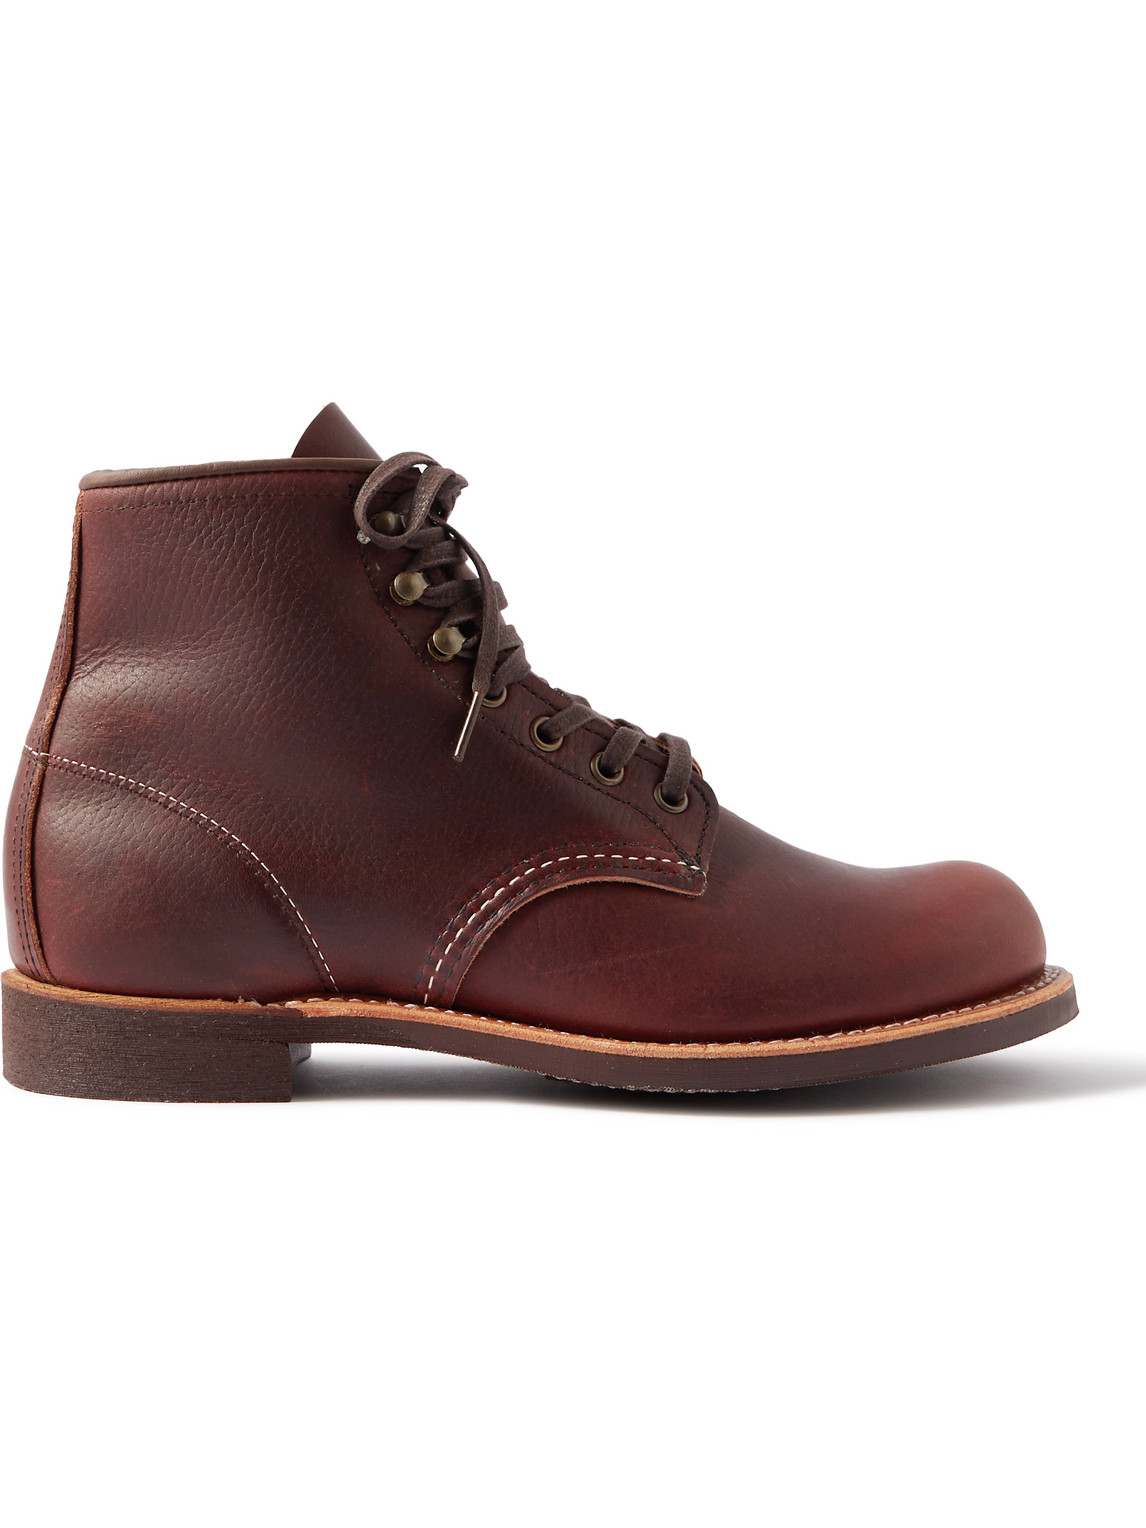 RED WING SHOES BLACKSMITH LEATHER BOOTS